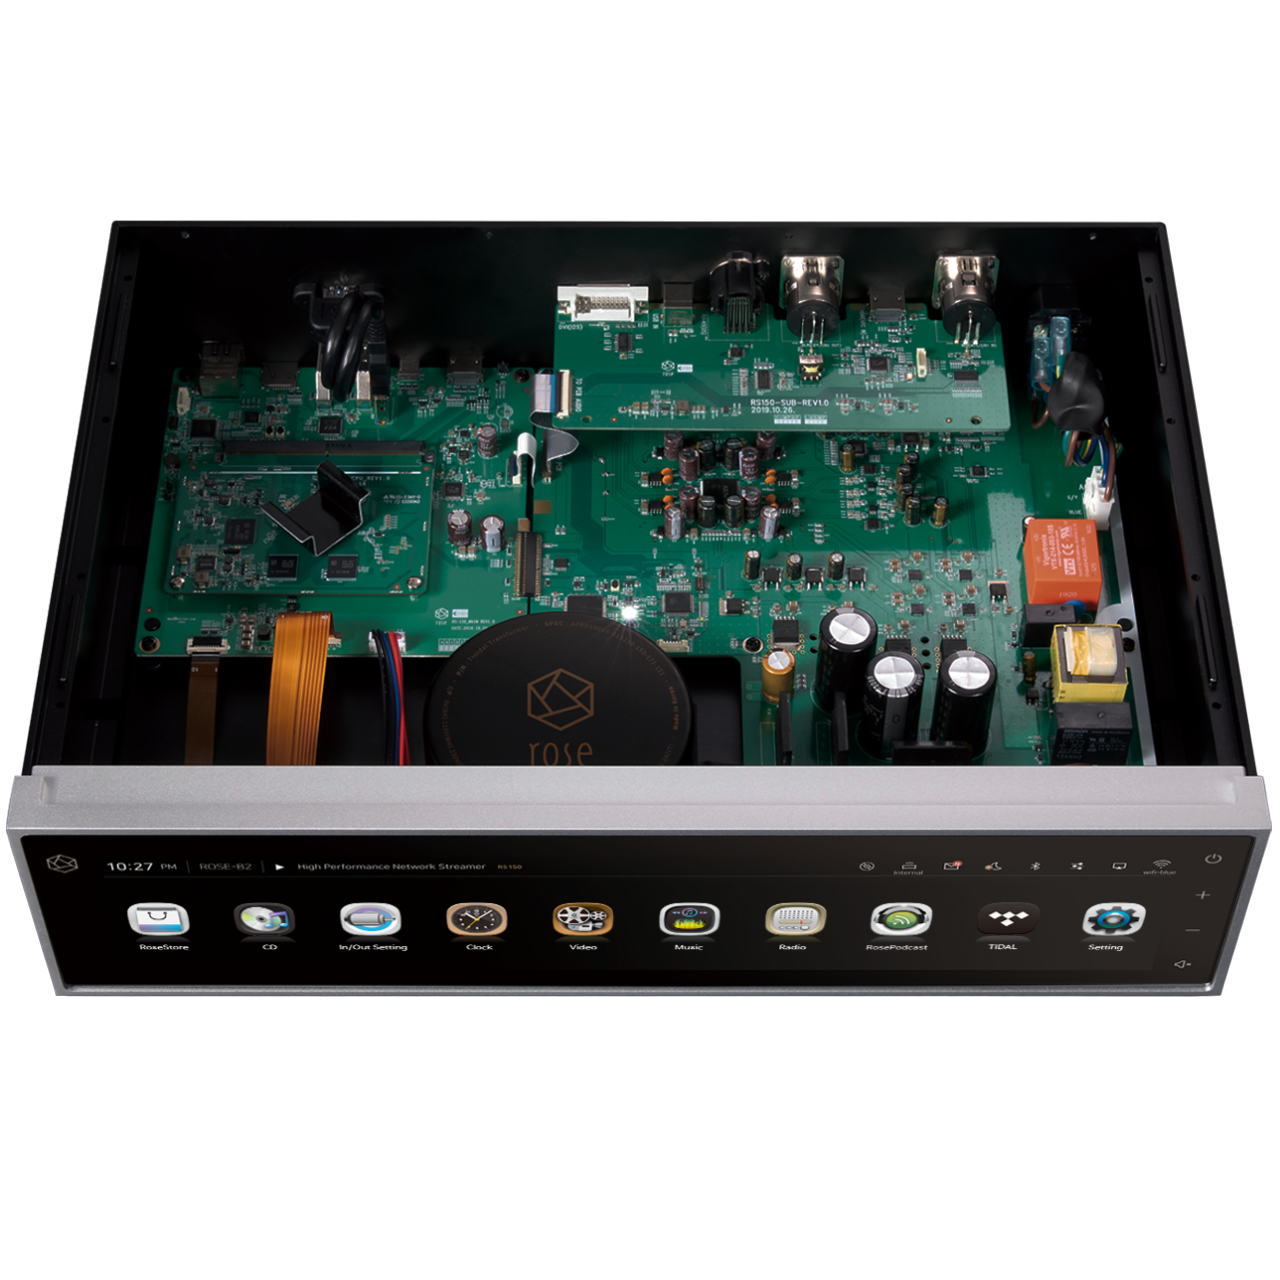 RS150B | Network Audio Player